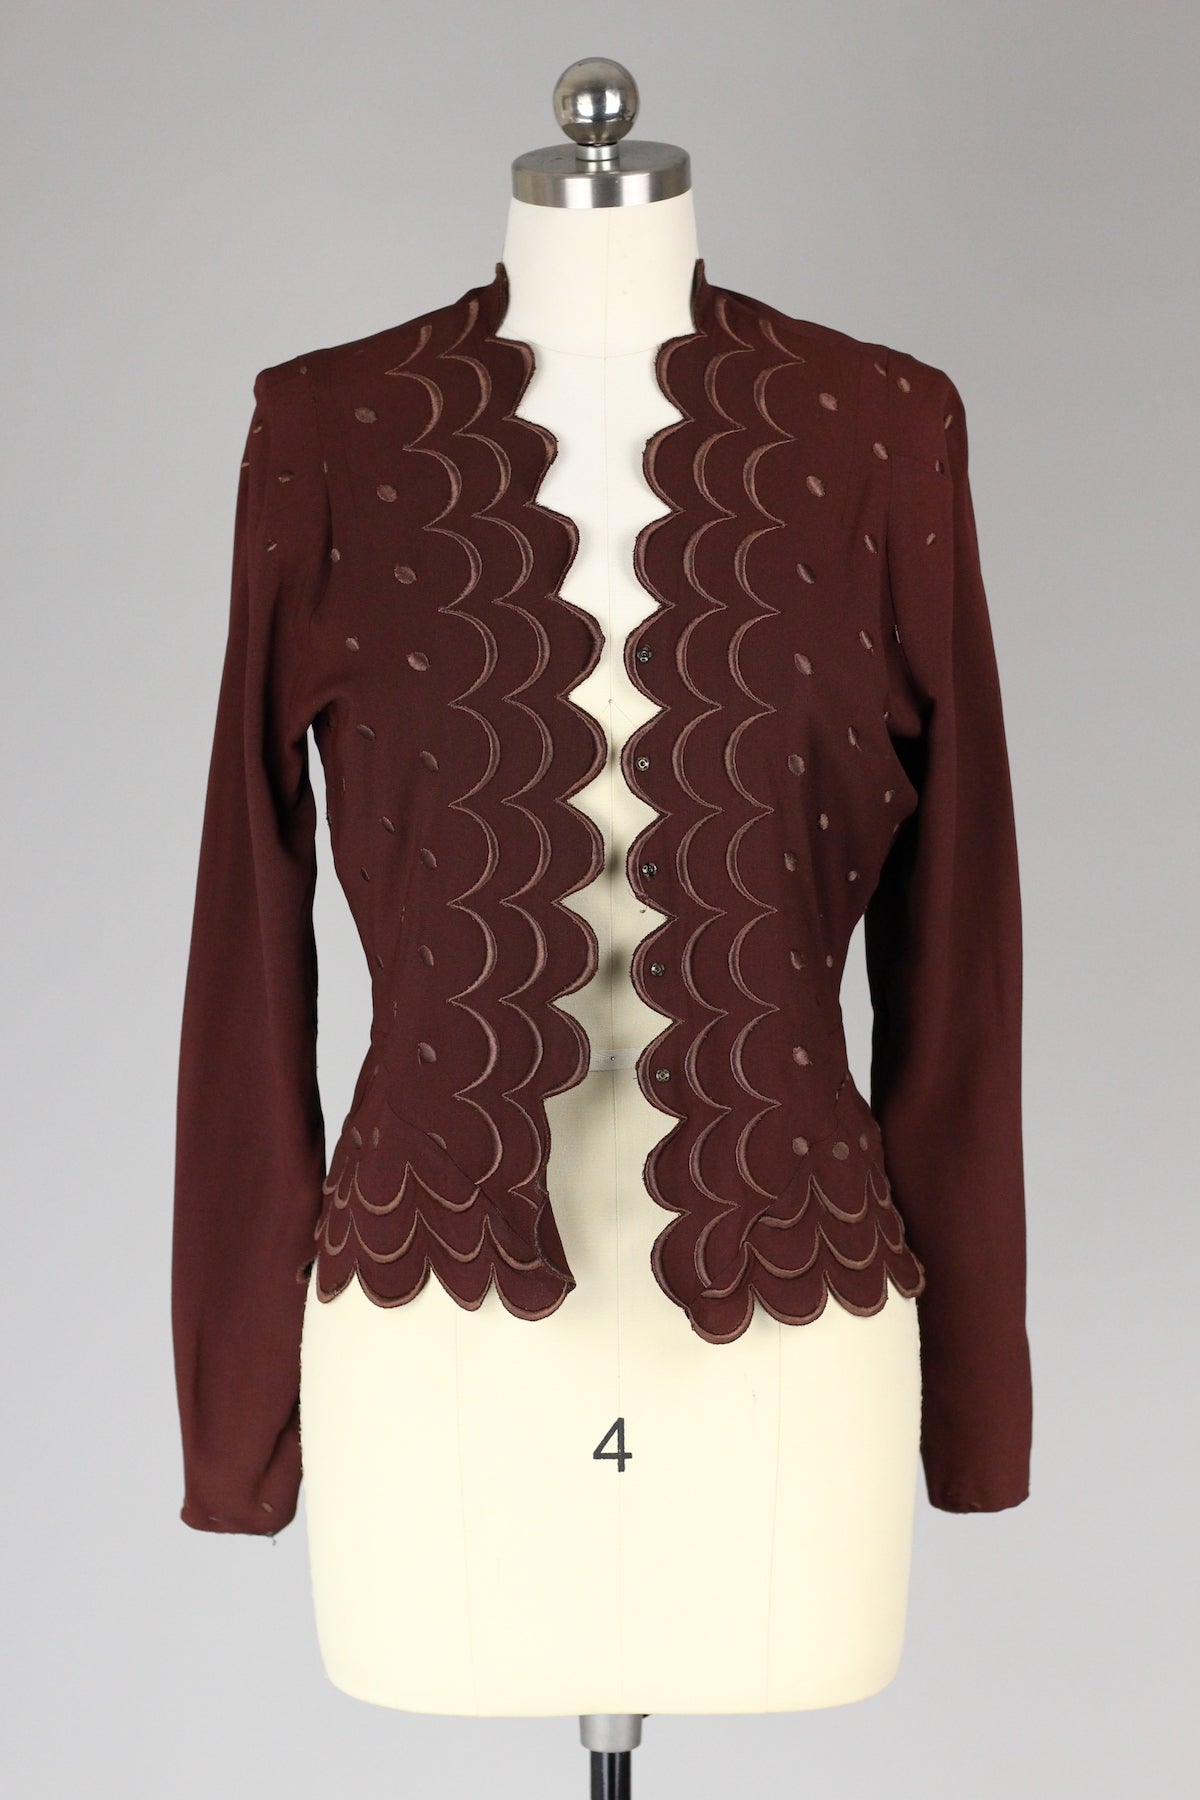 Rare Vintage 1930s CHANEL Adaptation Embroidered Scalloped Jacket